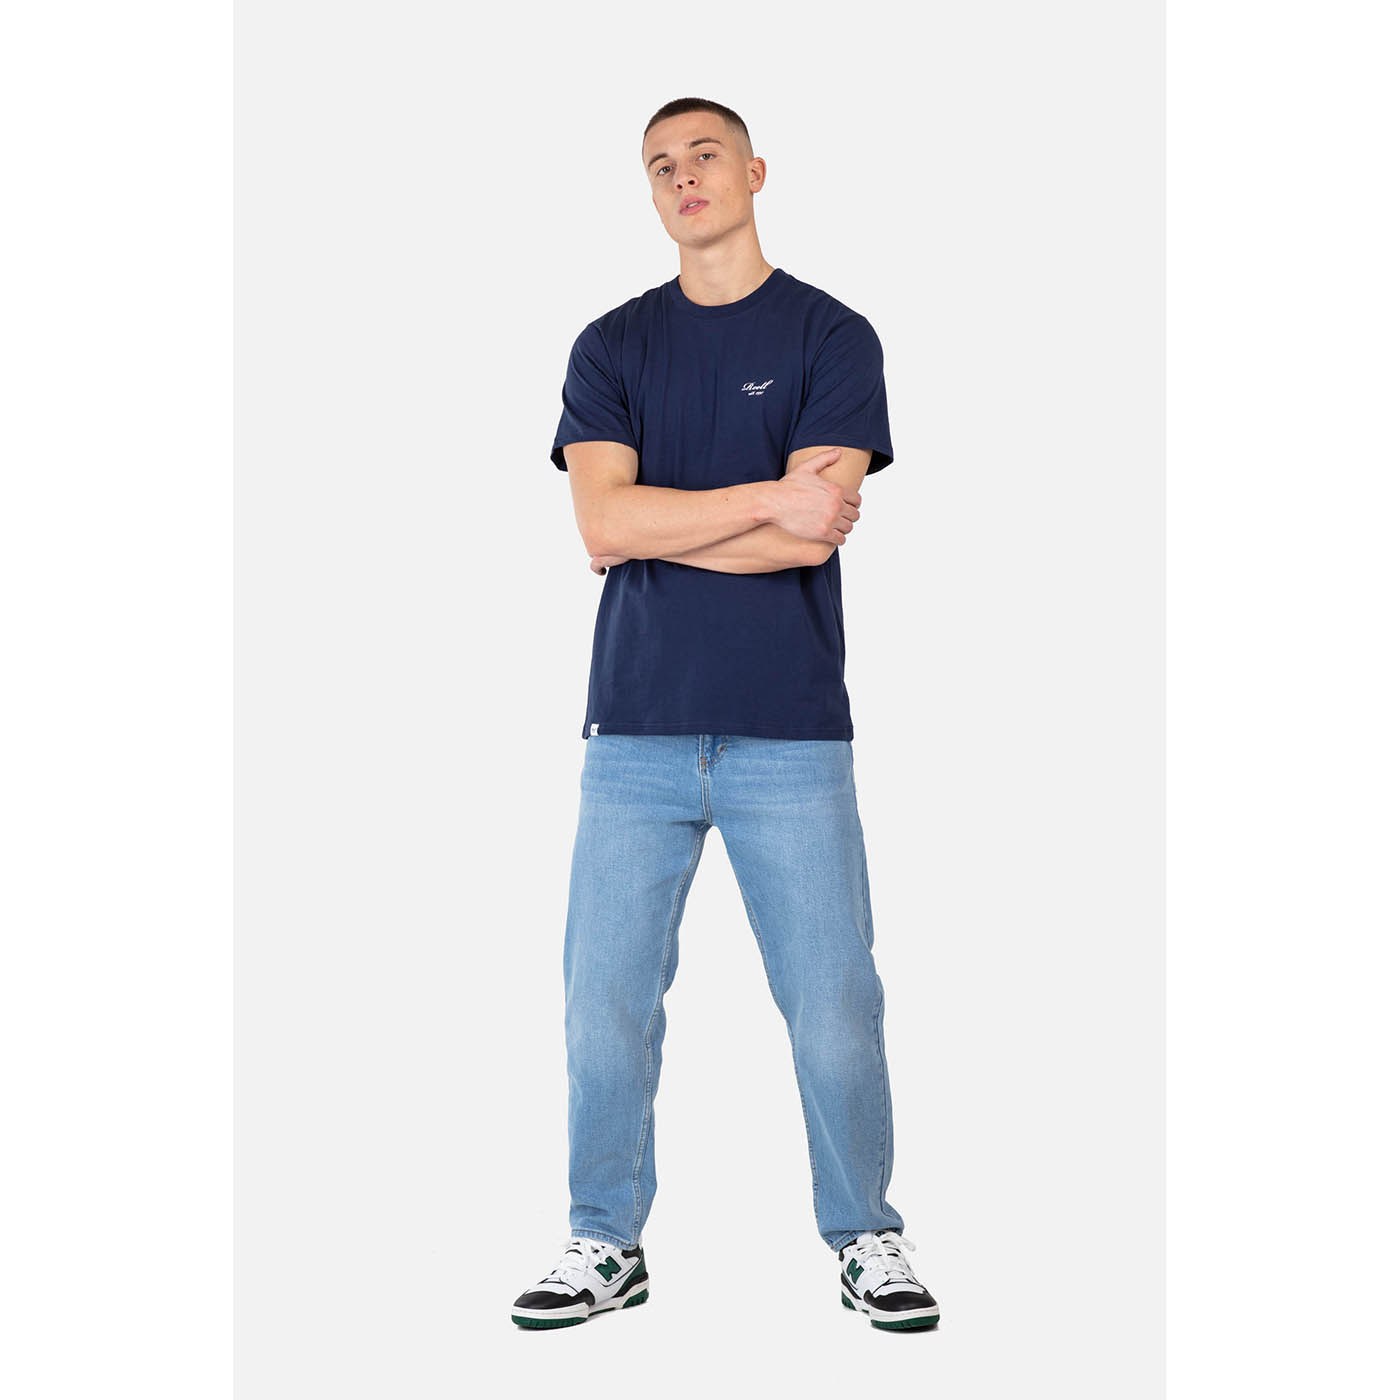 Reell Jeans Rave Tapered Fit Jeans Light Blue Stone